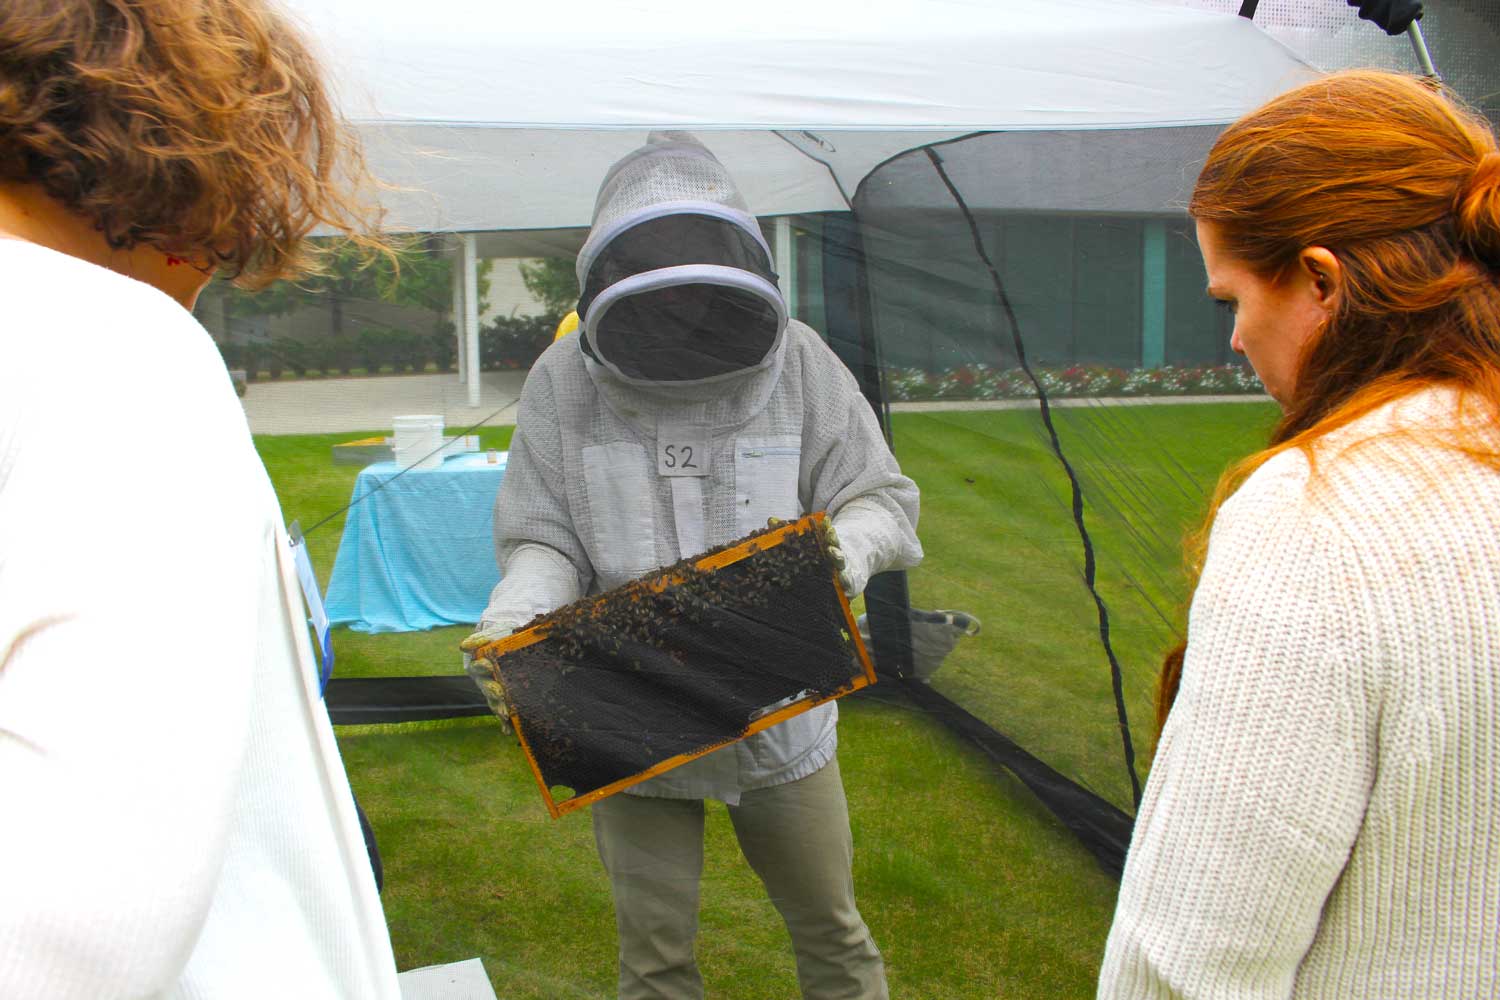 An Eco Rep introducing onlookers to the UTD honey bees.